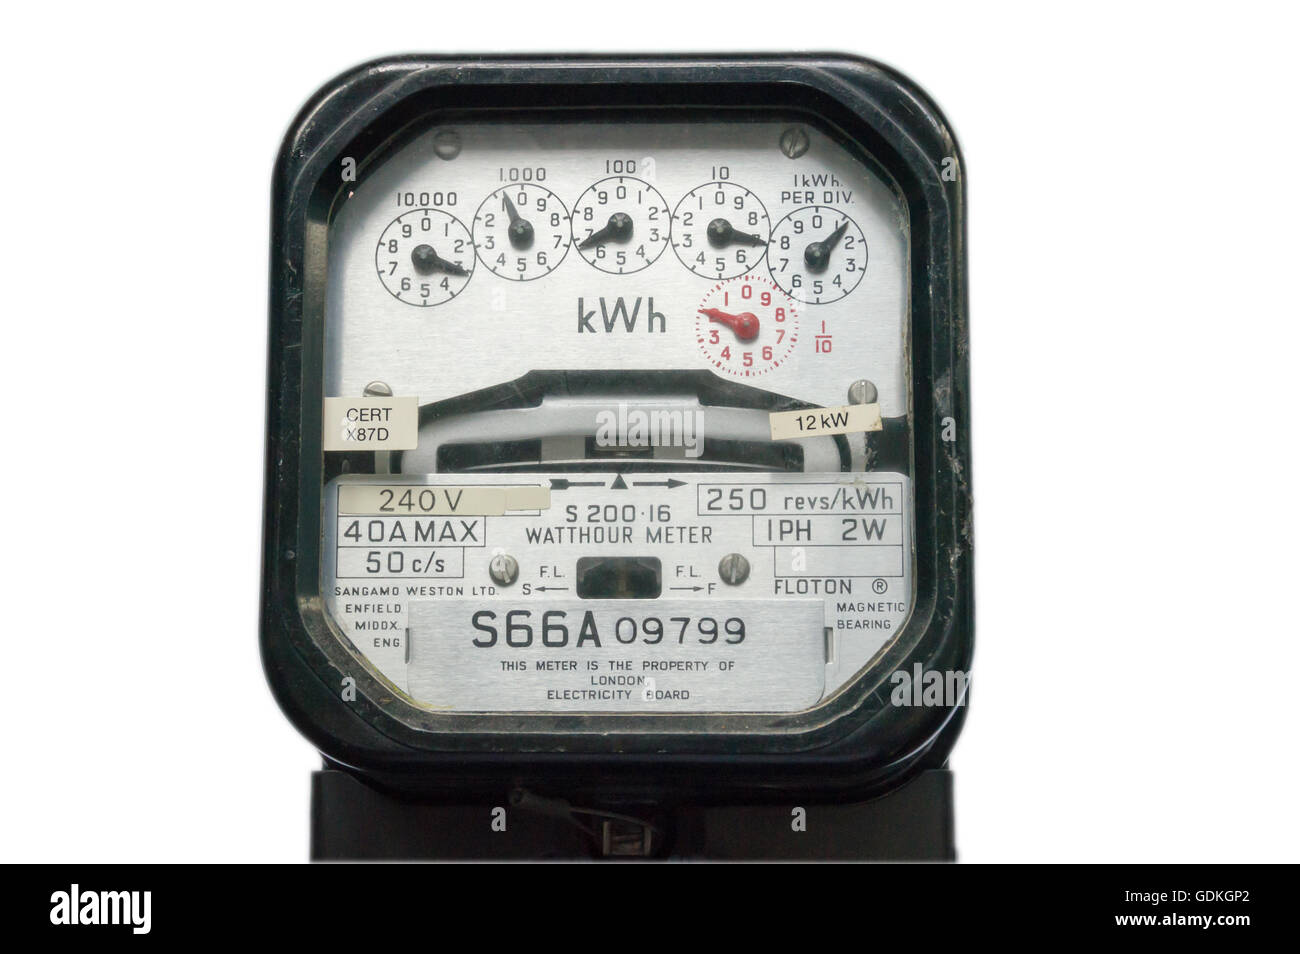 Dial type electricity meter made by Sangamo Weston, Enfield, England, reading  30671.2 kWh. Cutout with a white background Stock Photo